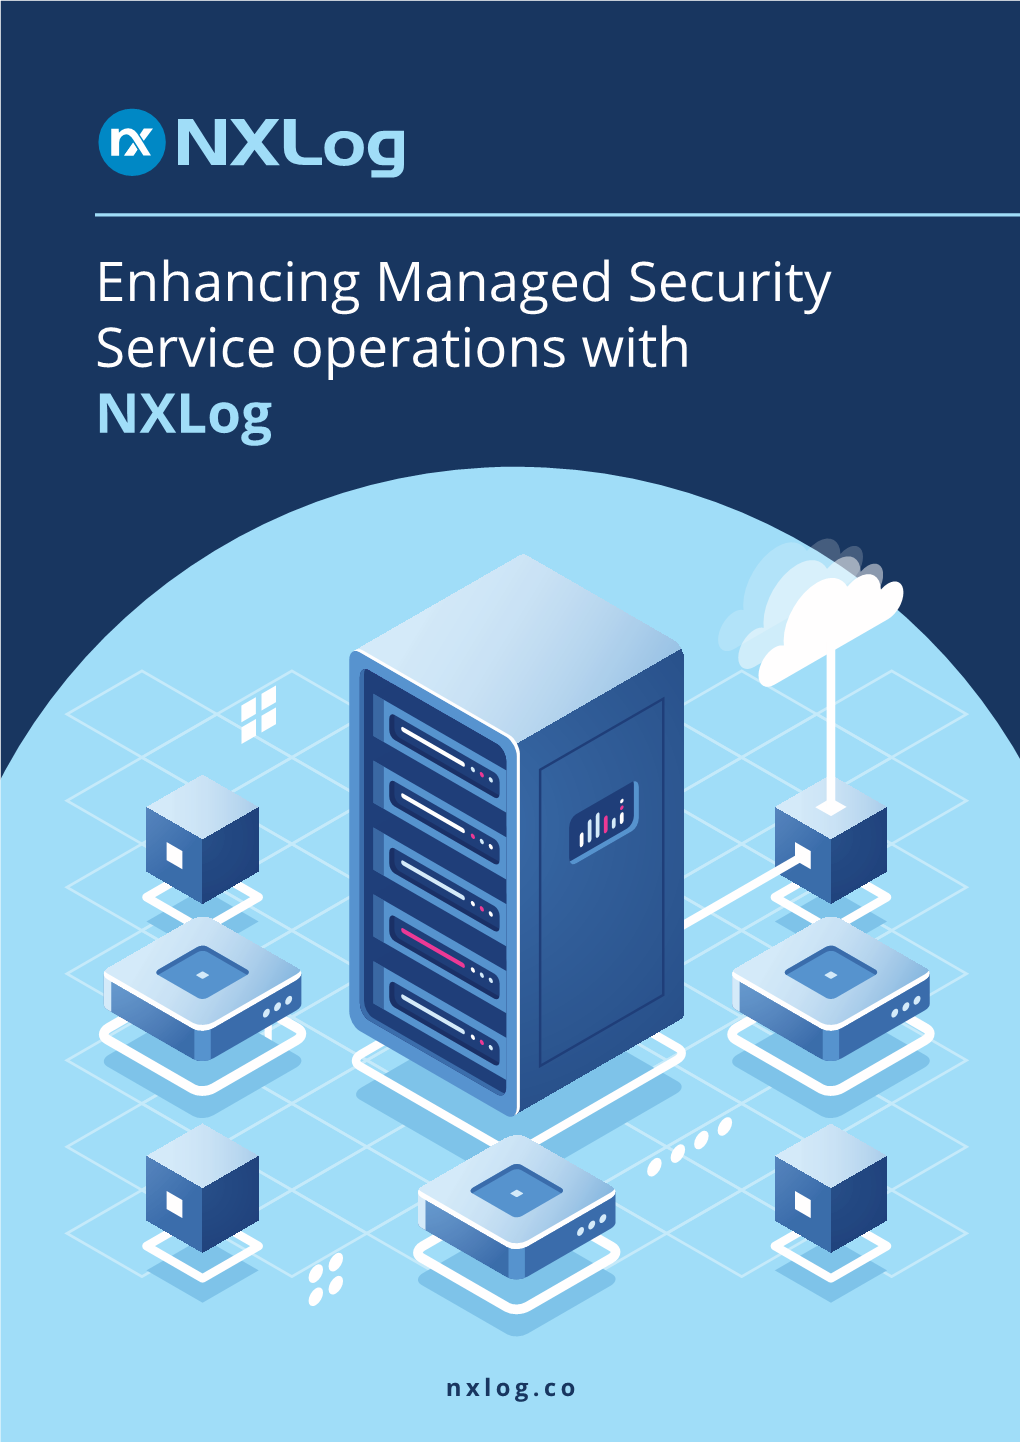 Enhancing Managed Security Service Operations with Nxlog